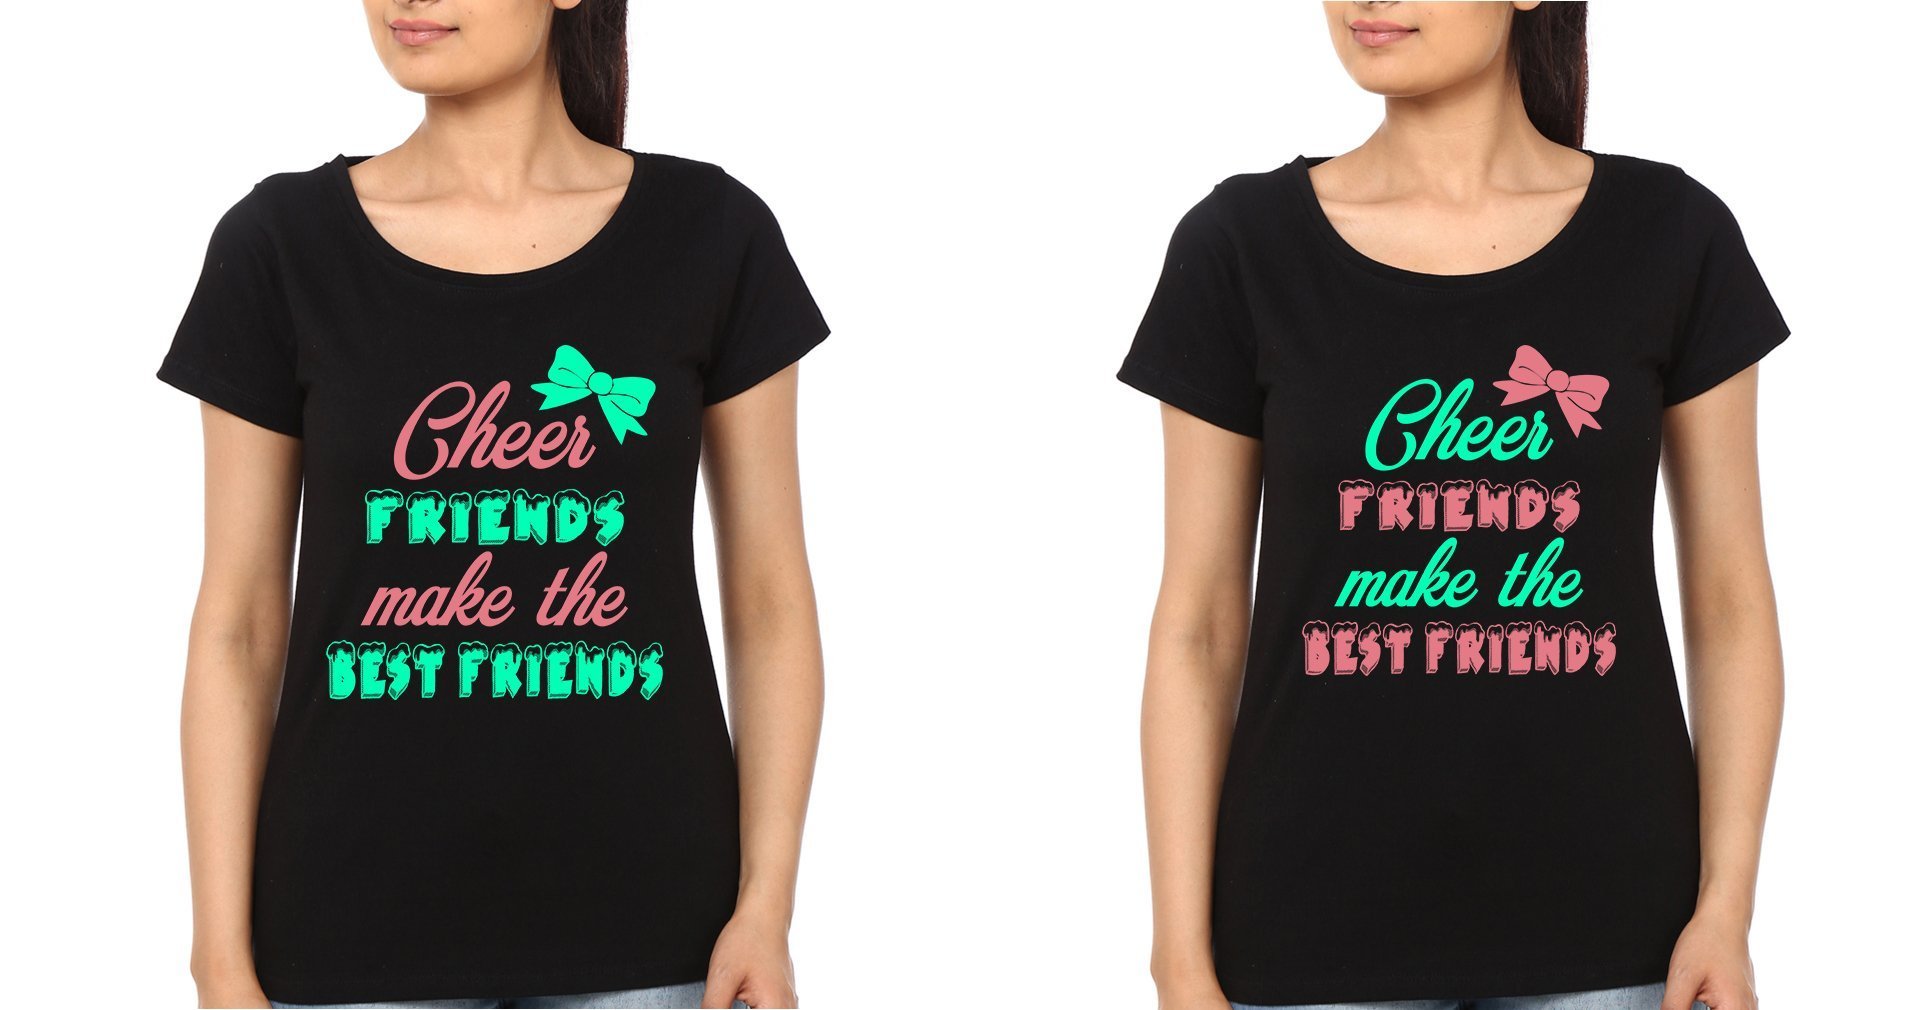 Cheer Friend Make Best Friends BFF Half Sleeves T-Shirts-FunkyTradition - FunkyTradition